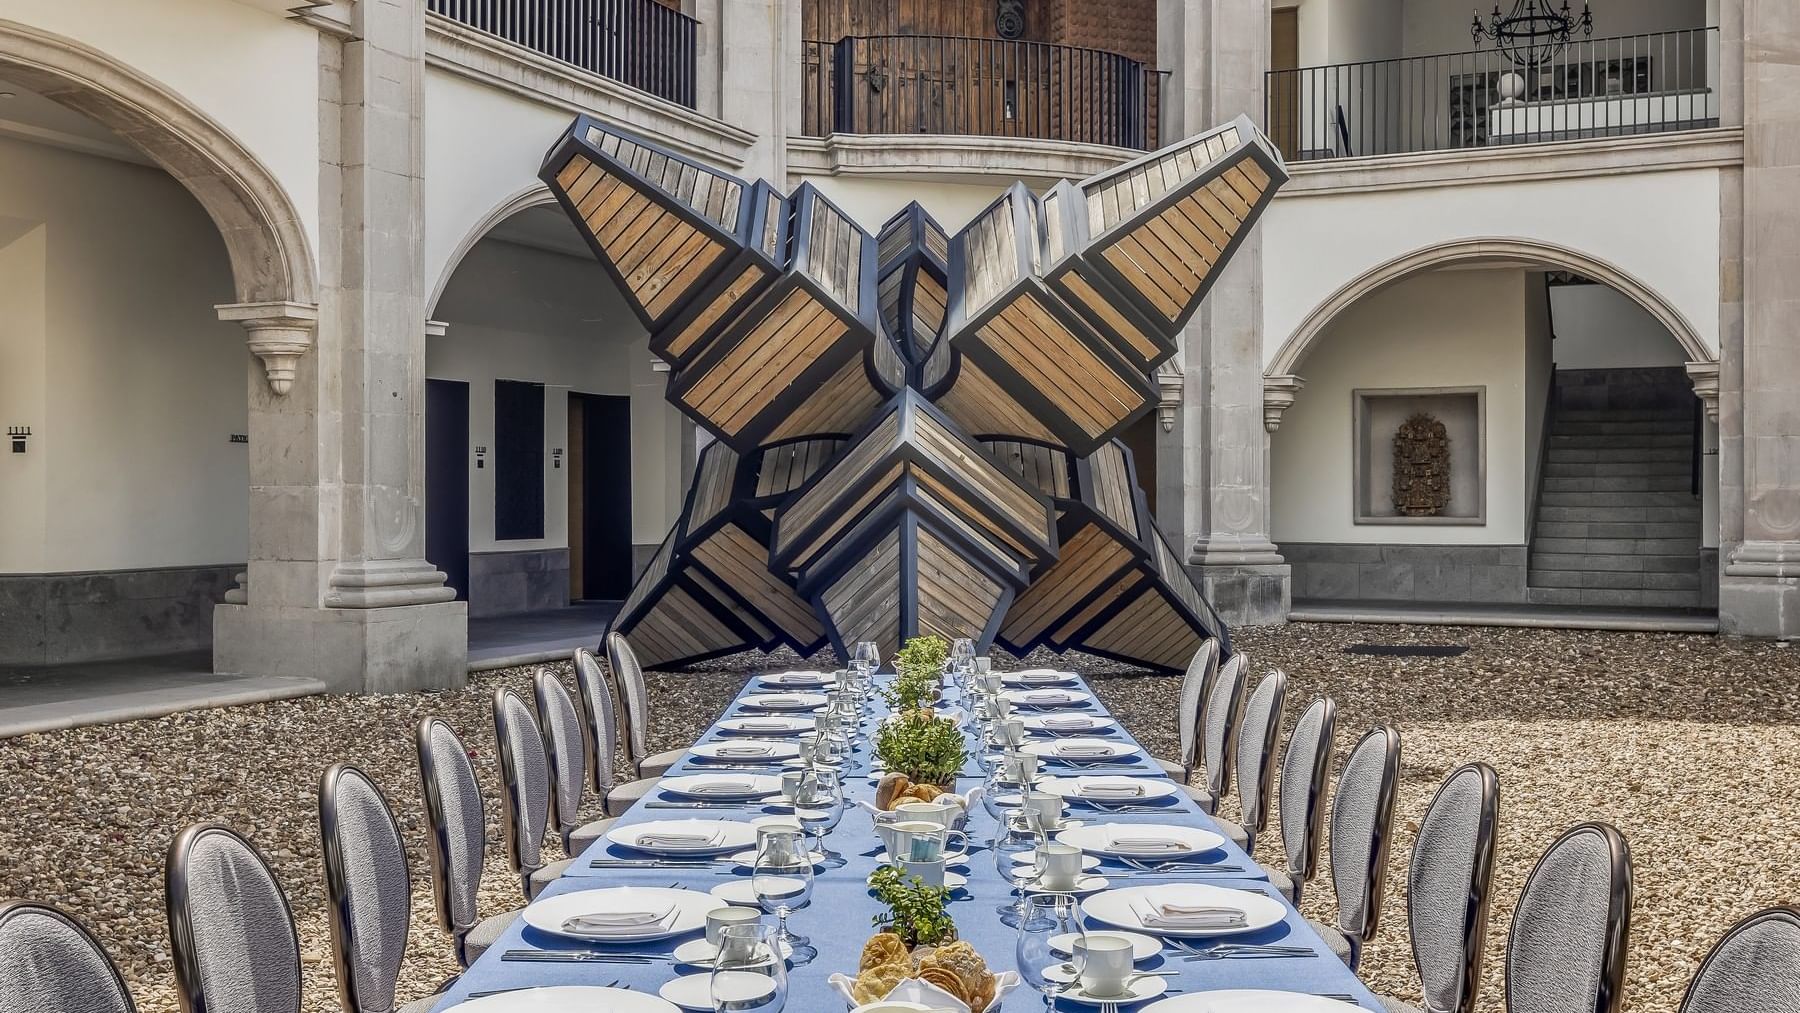 Dining table set-up in the courtyard next to a giant sculpture at Live Aqua San Miguel de Allende